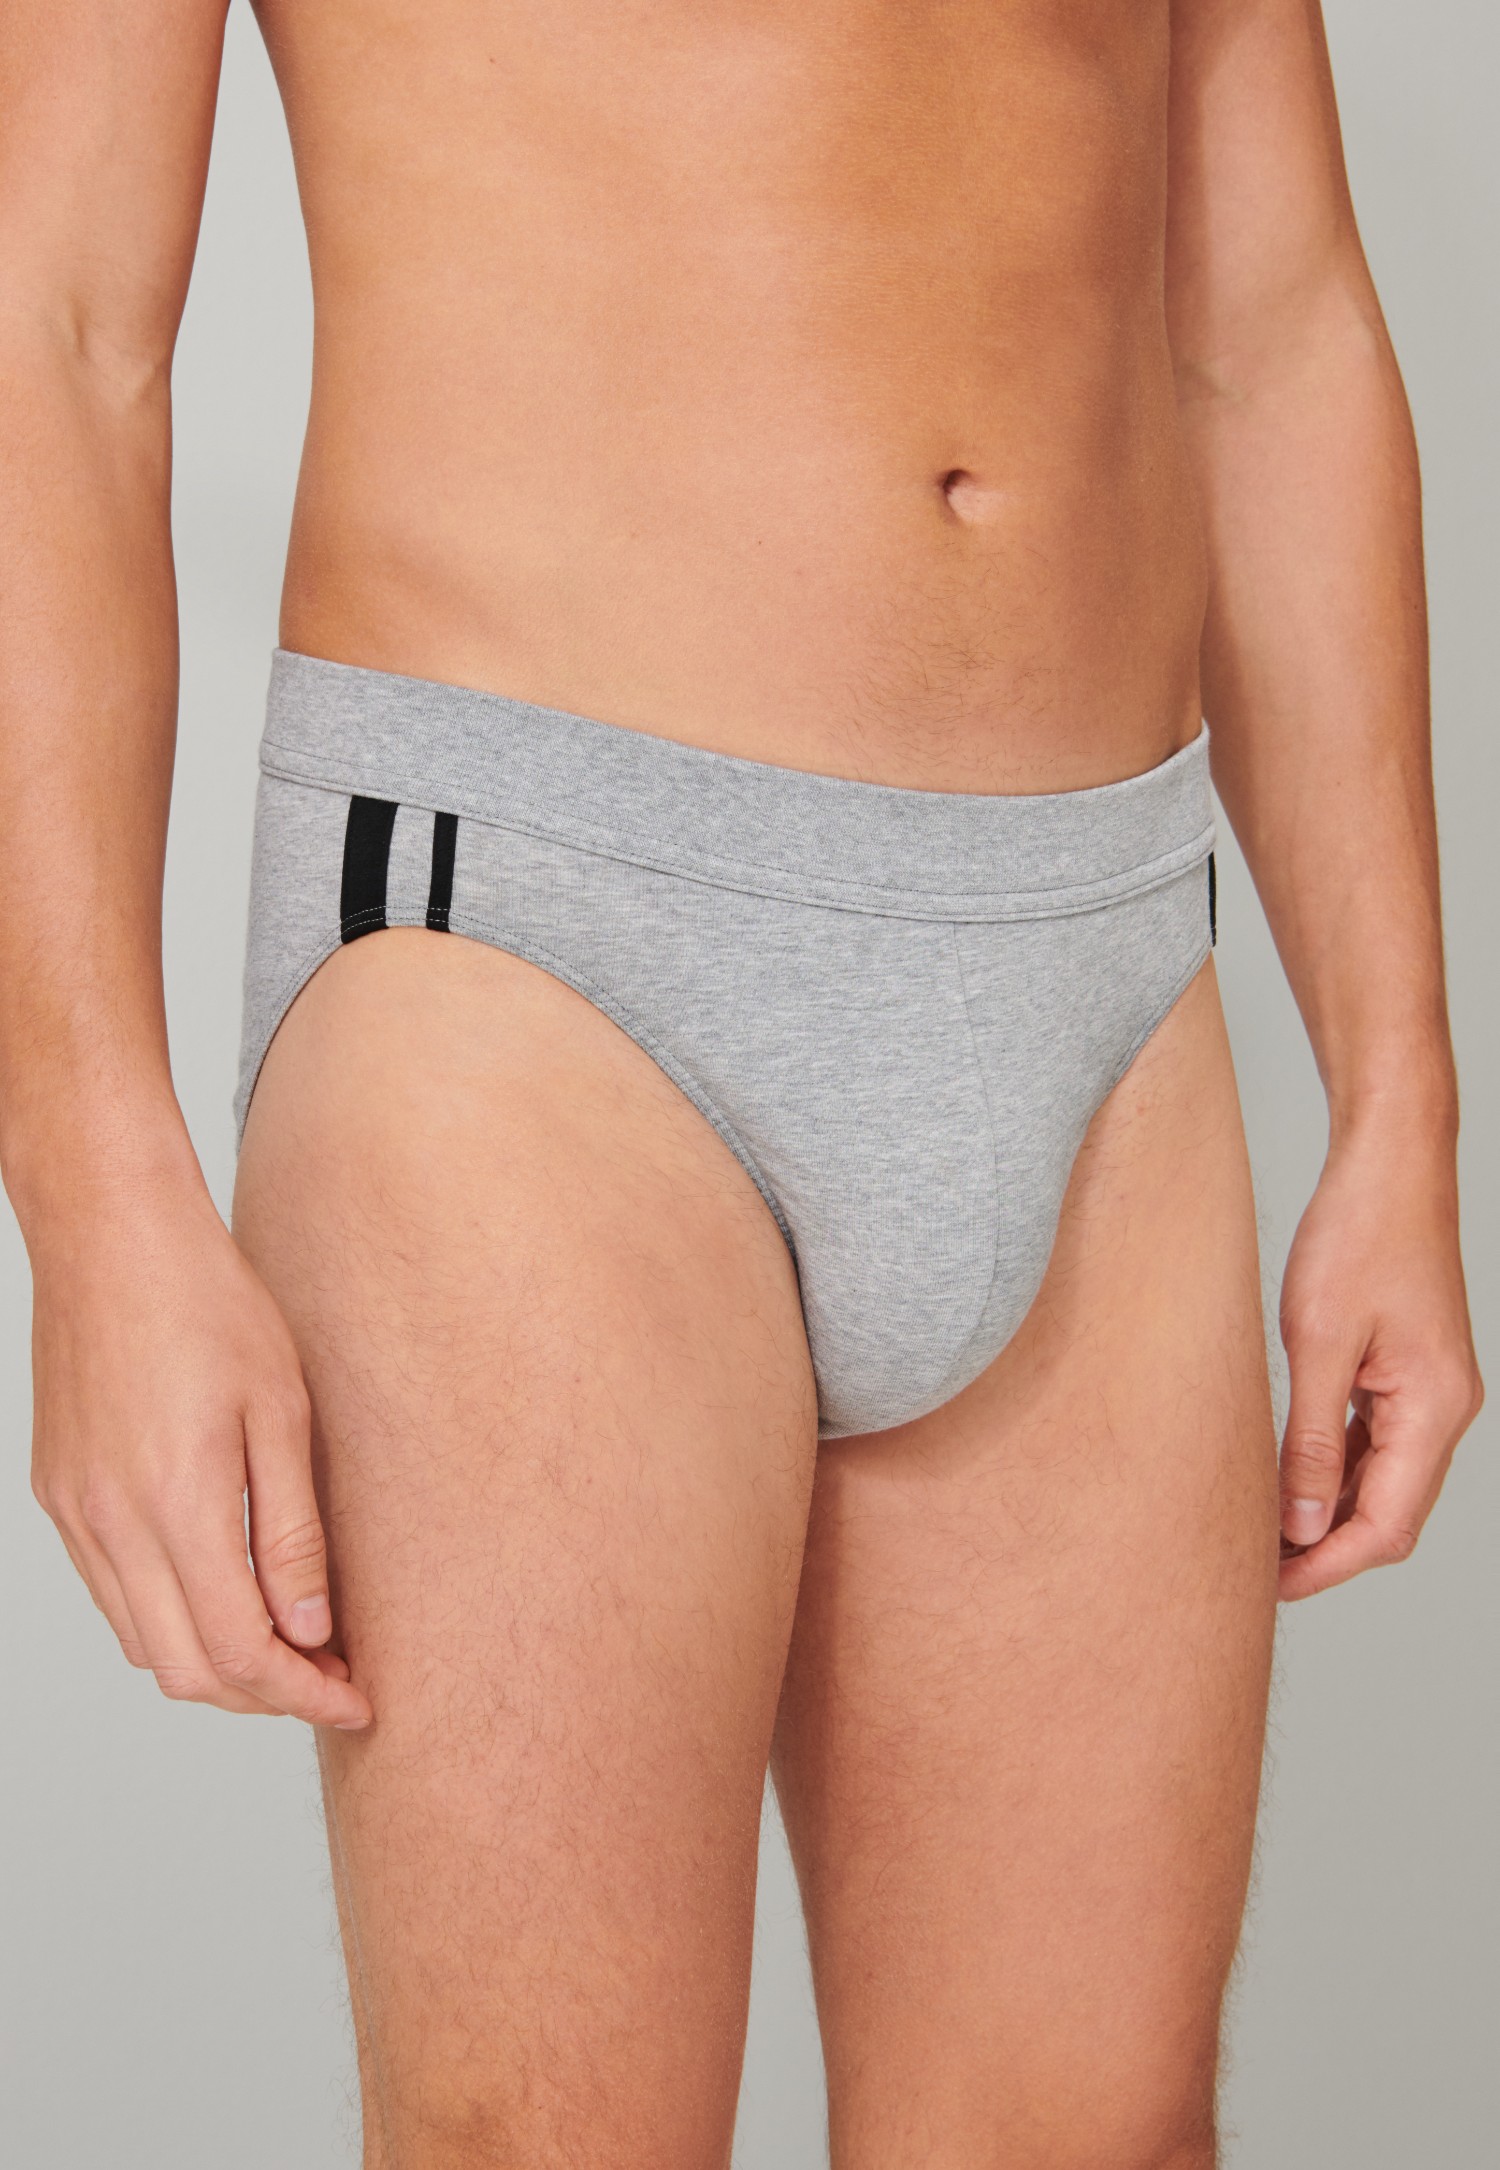 Whatever Happened To KENT Underwear After Shark Tank?